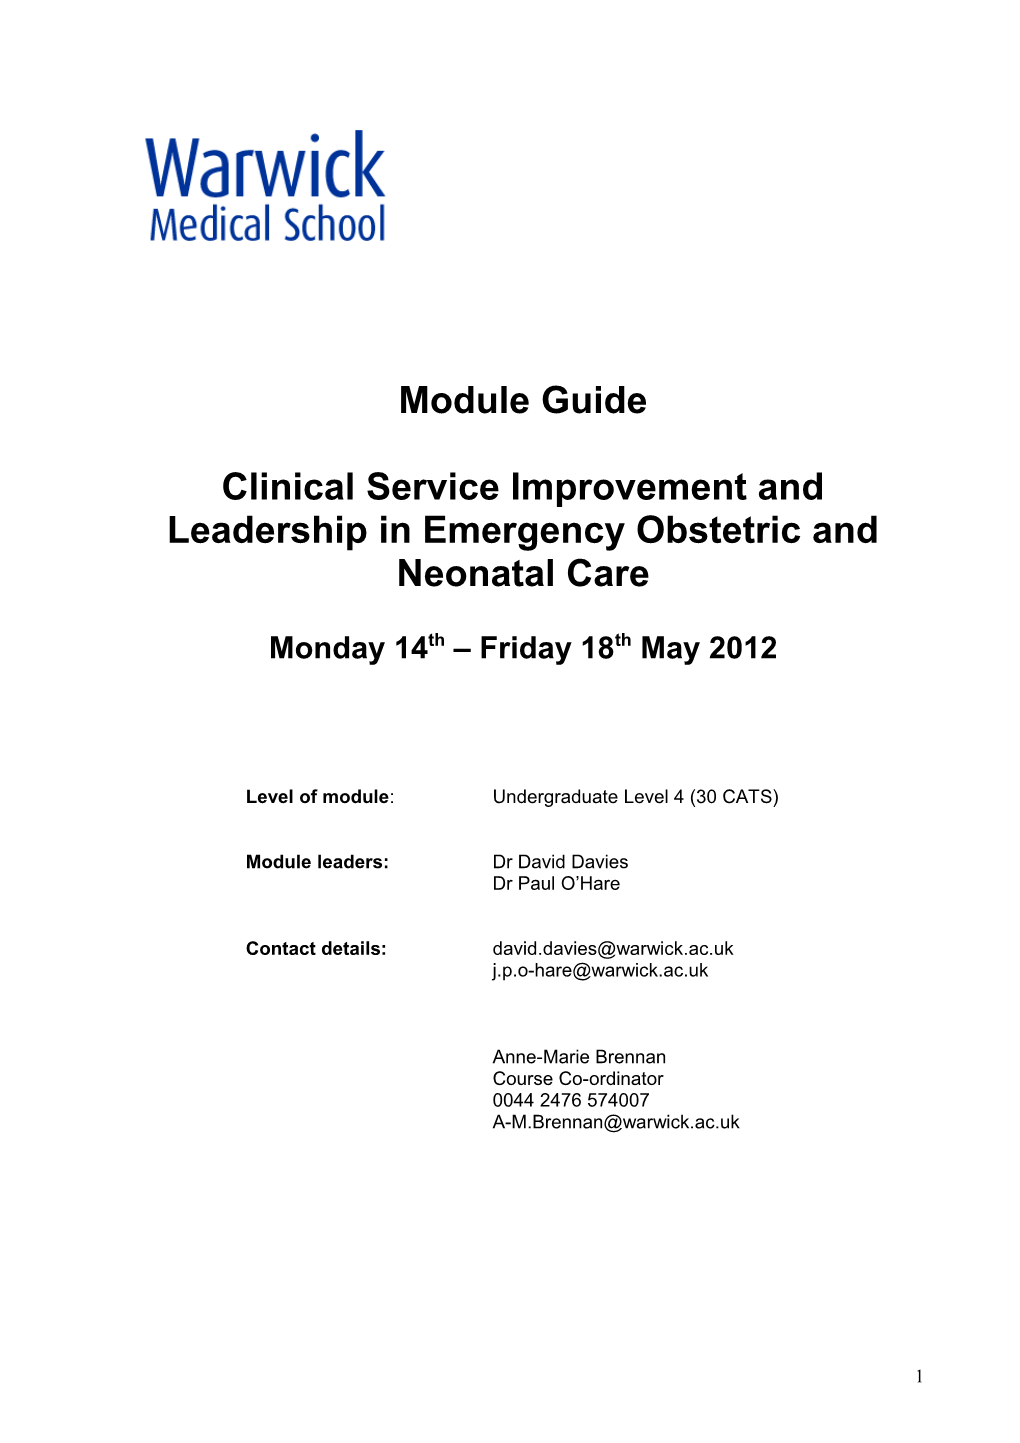 Clinical Service Improvement and Leadership in Emergency Obstetric and Neonatal Care